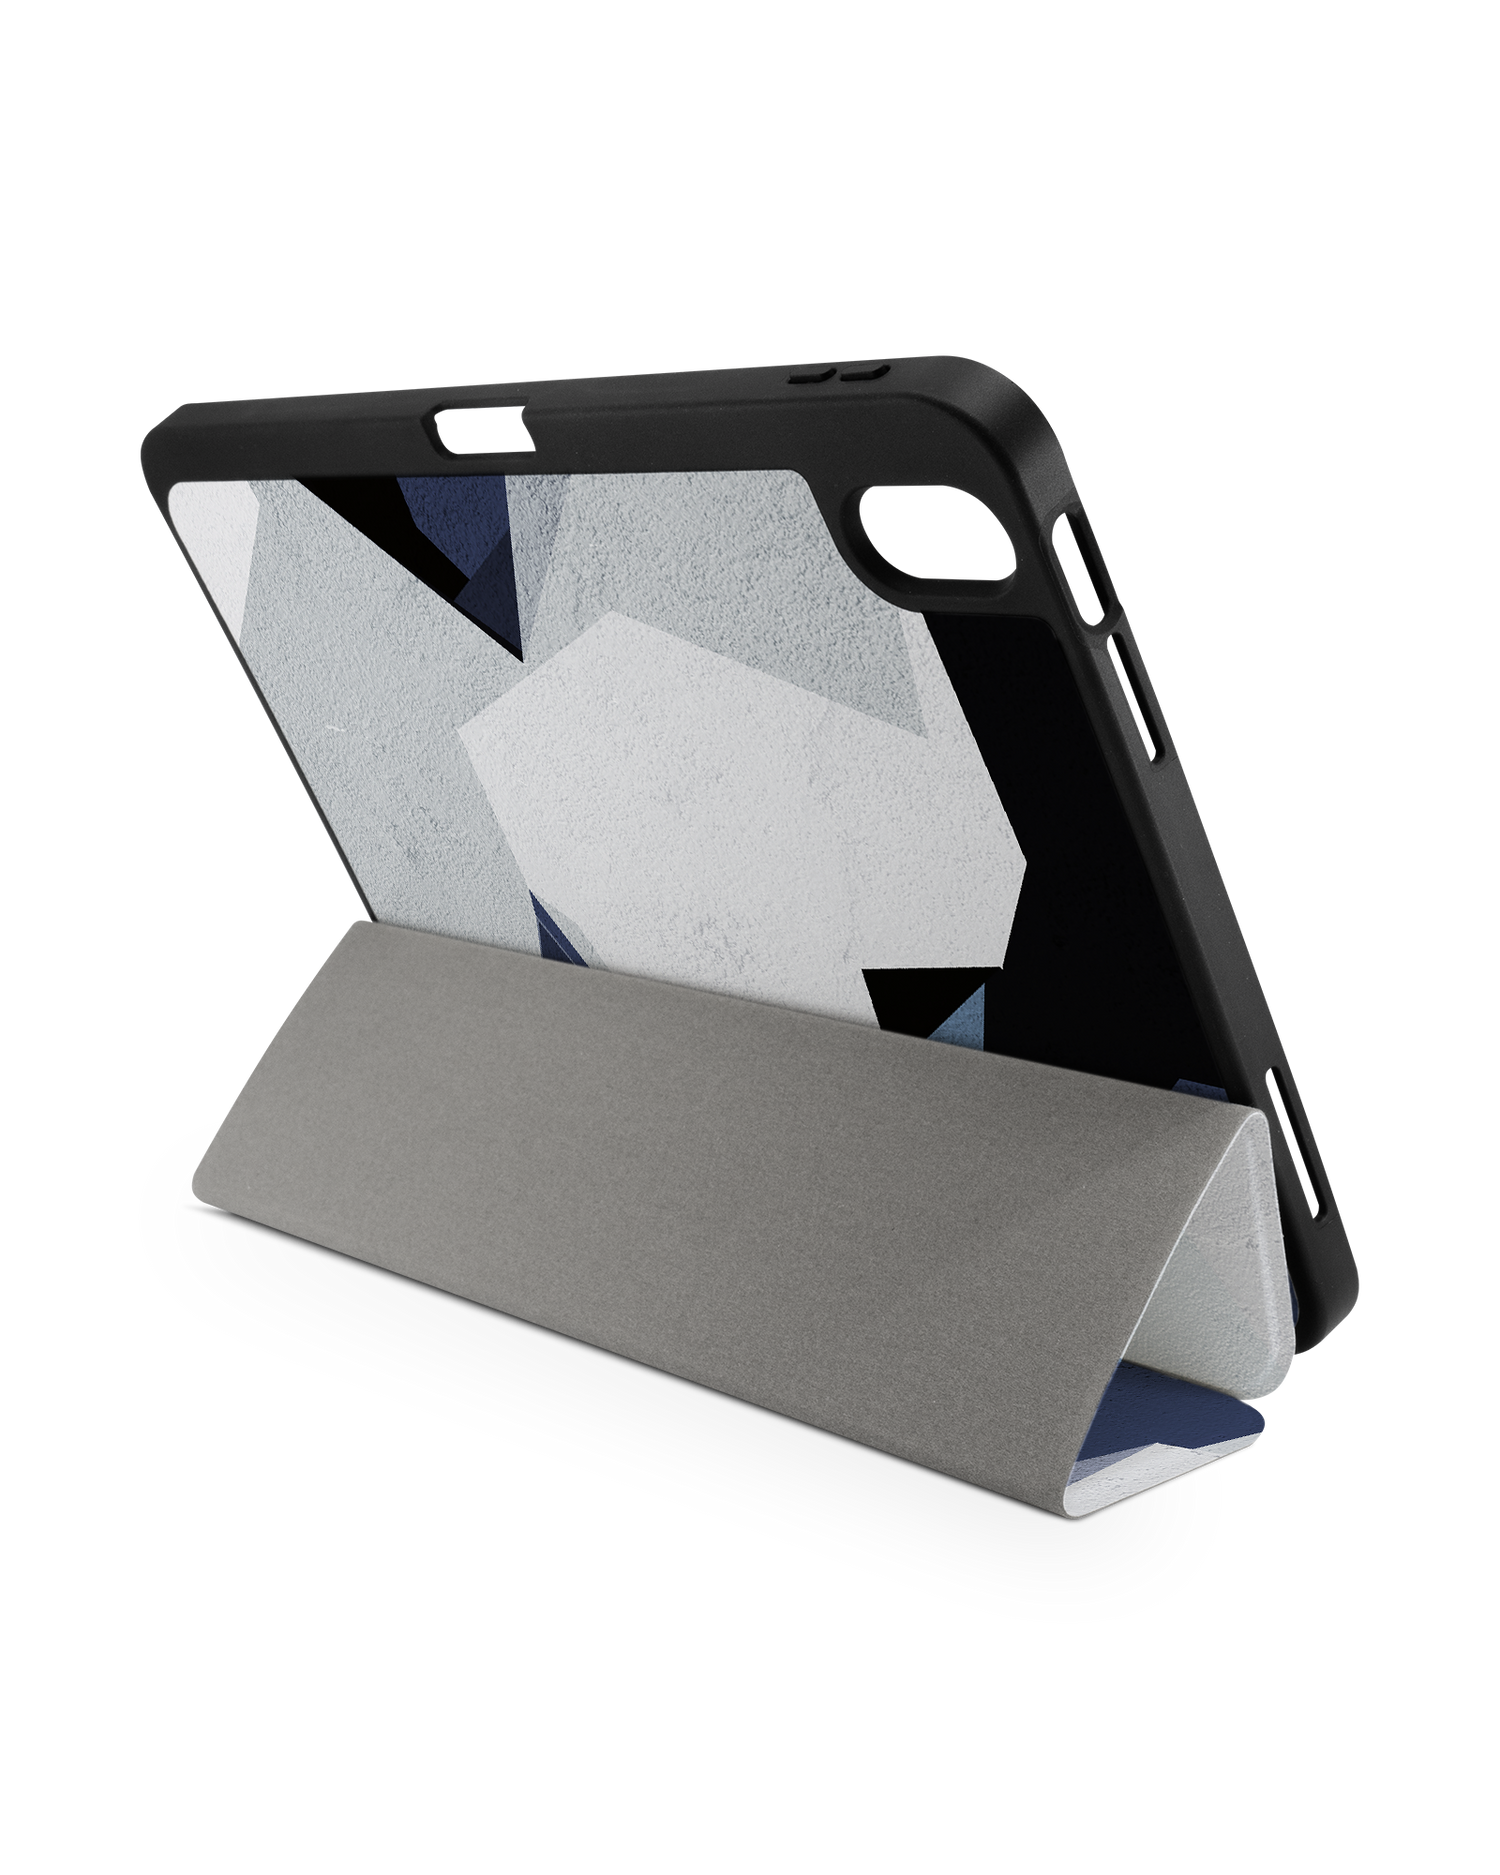 Geometric Camo Blue iPad Case with Pencil Holder for Apple iPad (10th Generation): Set up in landscape format (back view)